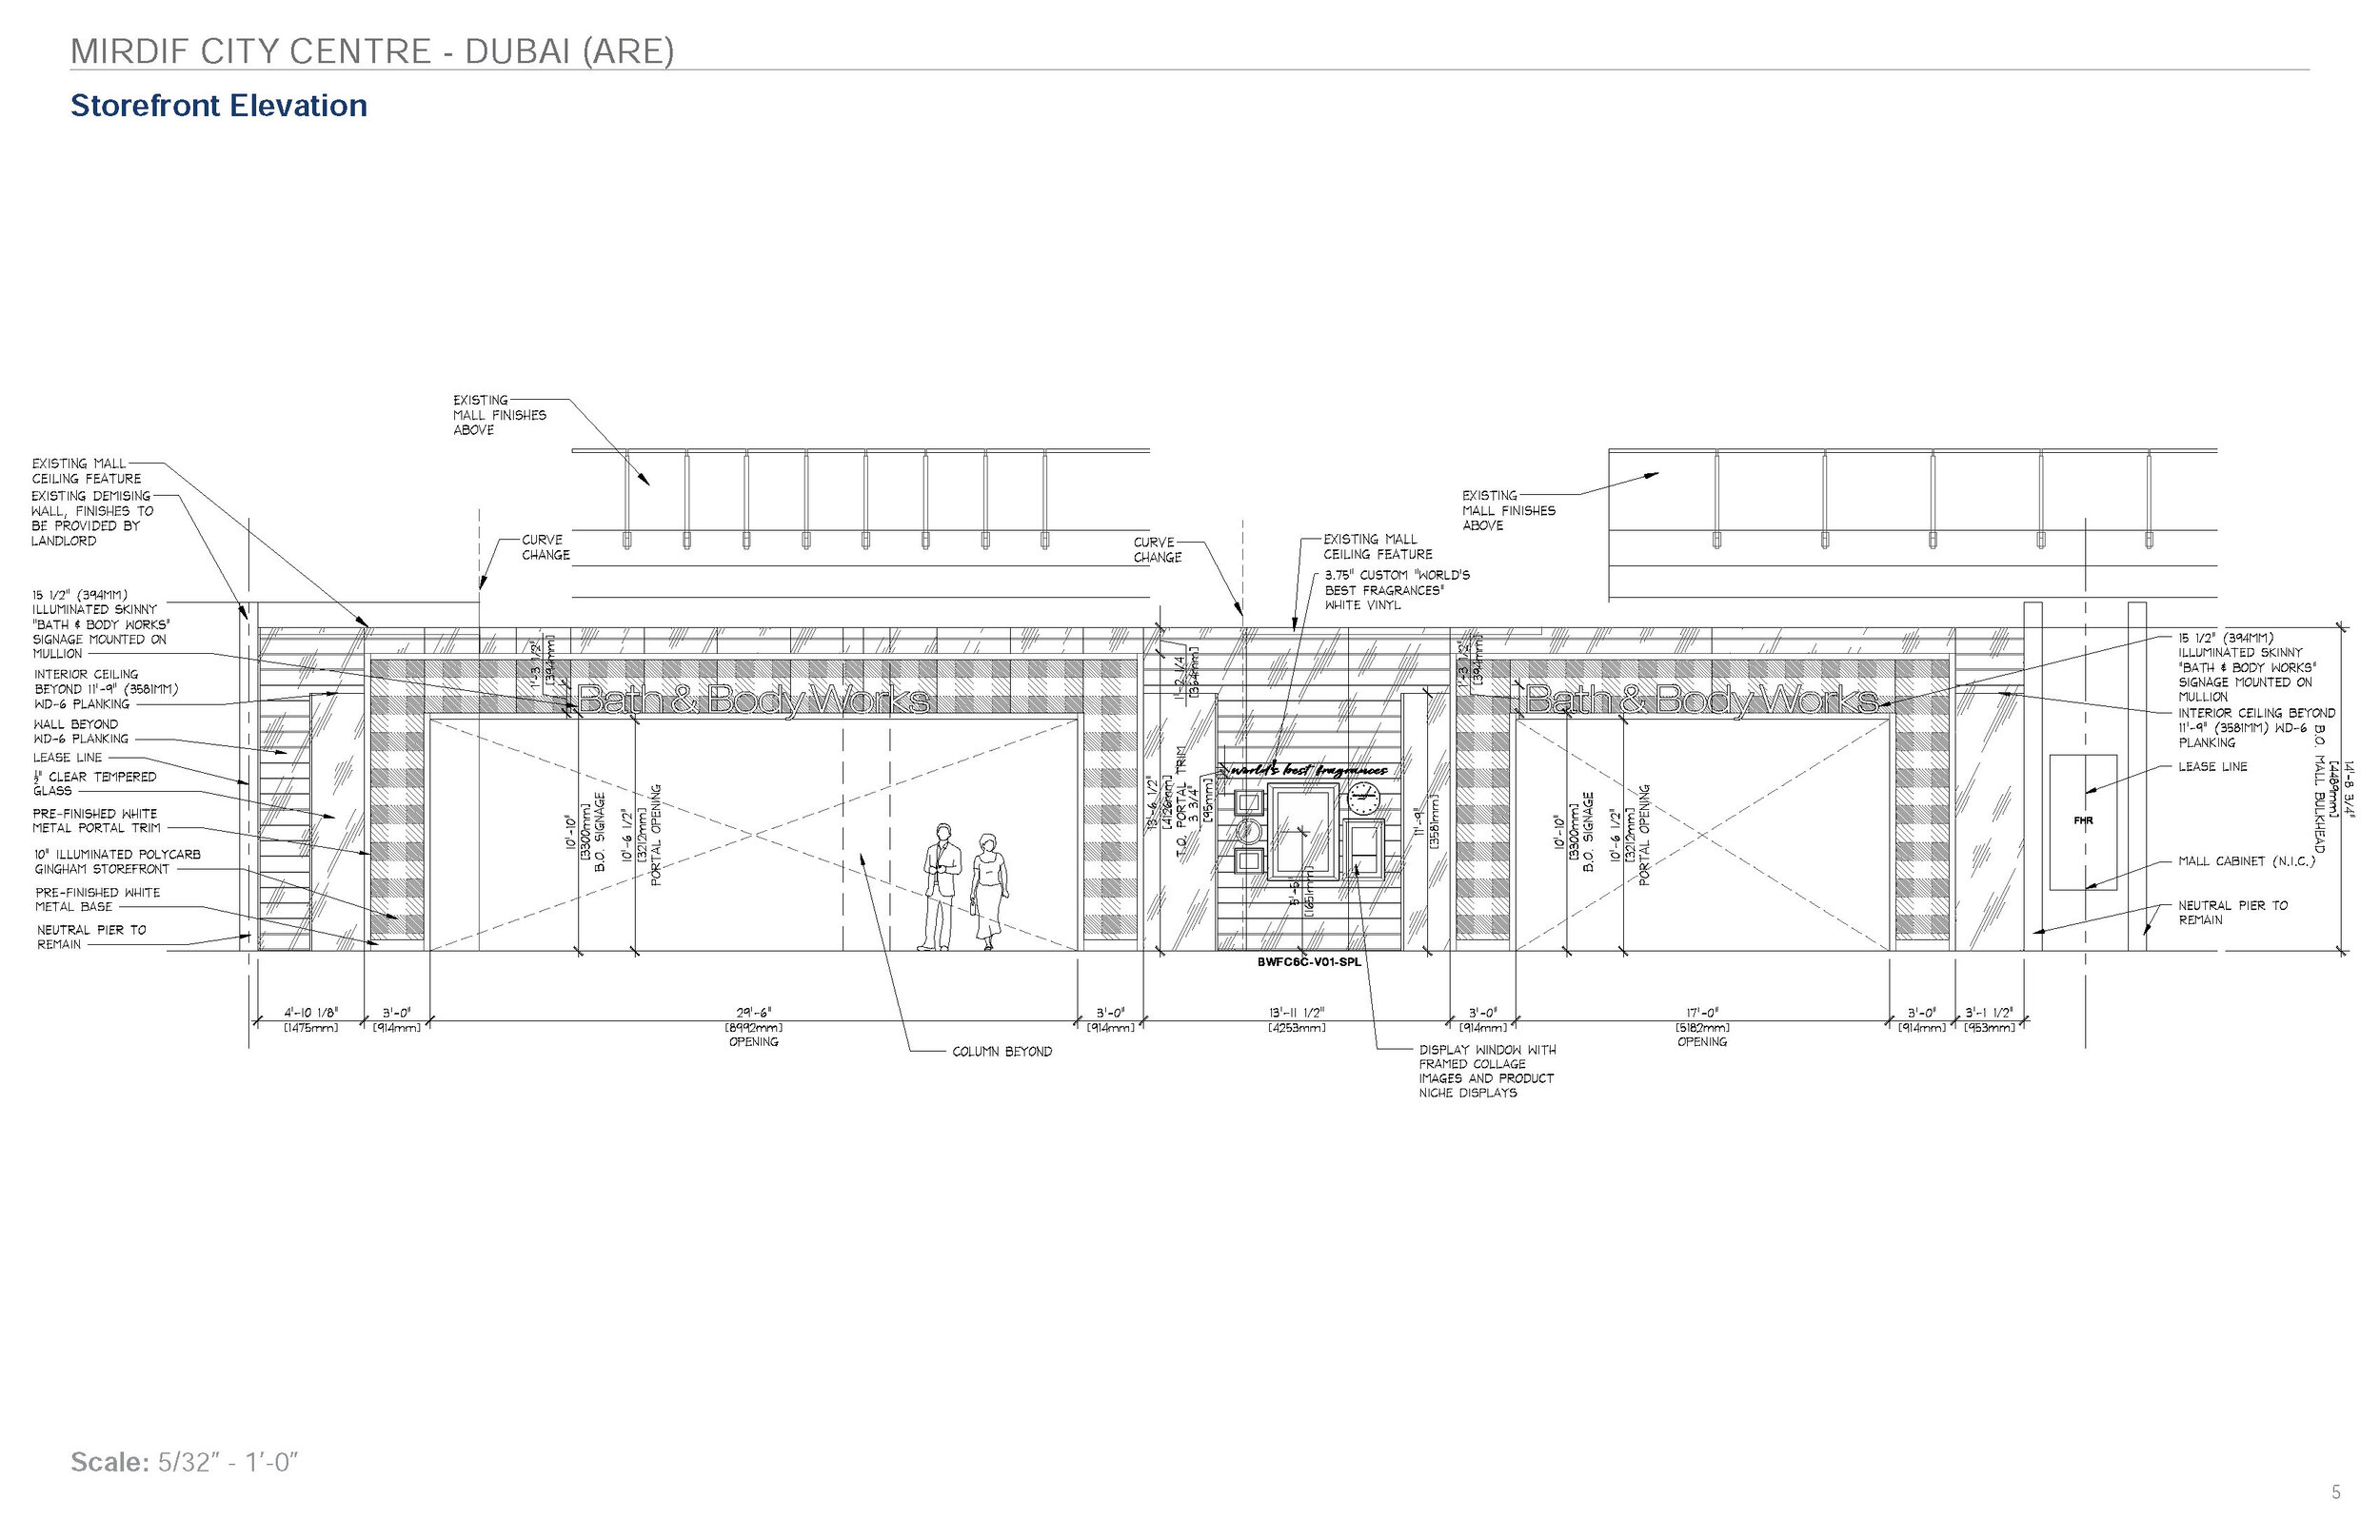 191126 BBW Mirdif City Centre (ARE) Revised Preliminary Schematic Design Package__Page_05.jpg